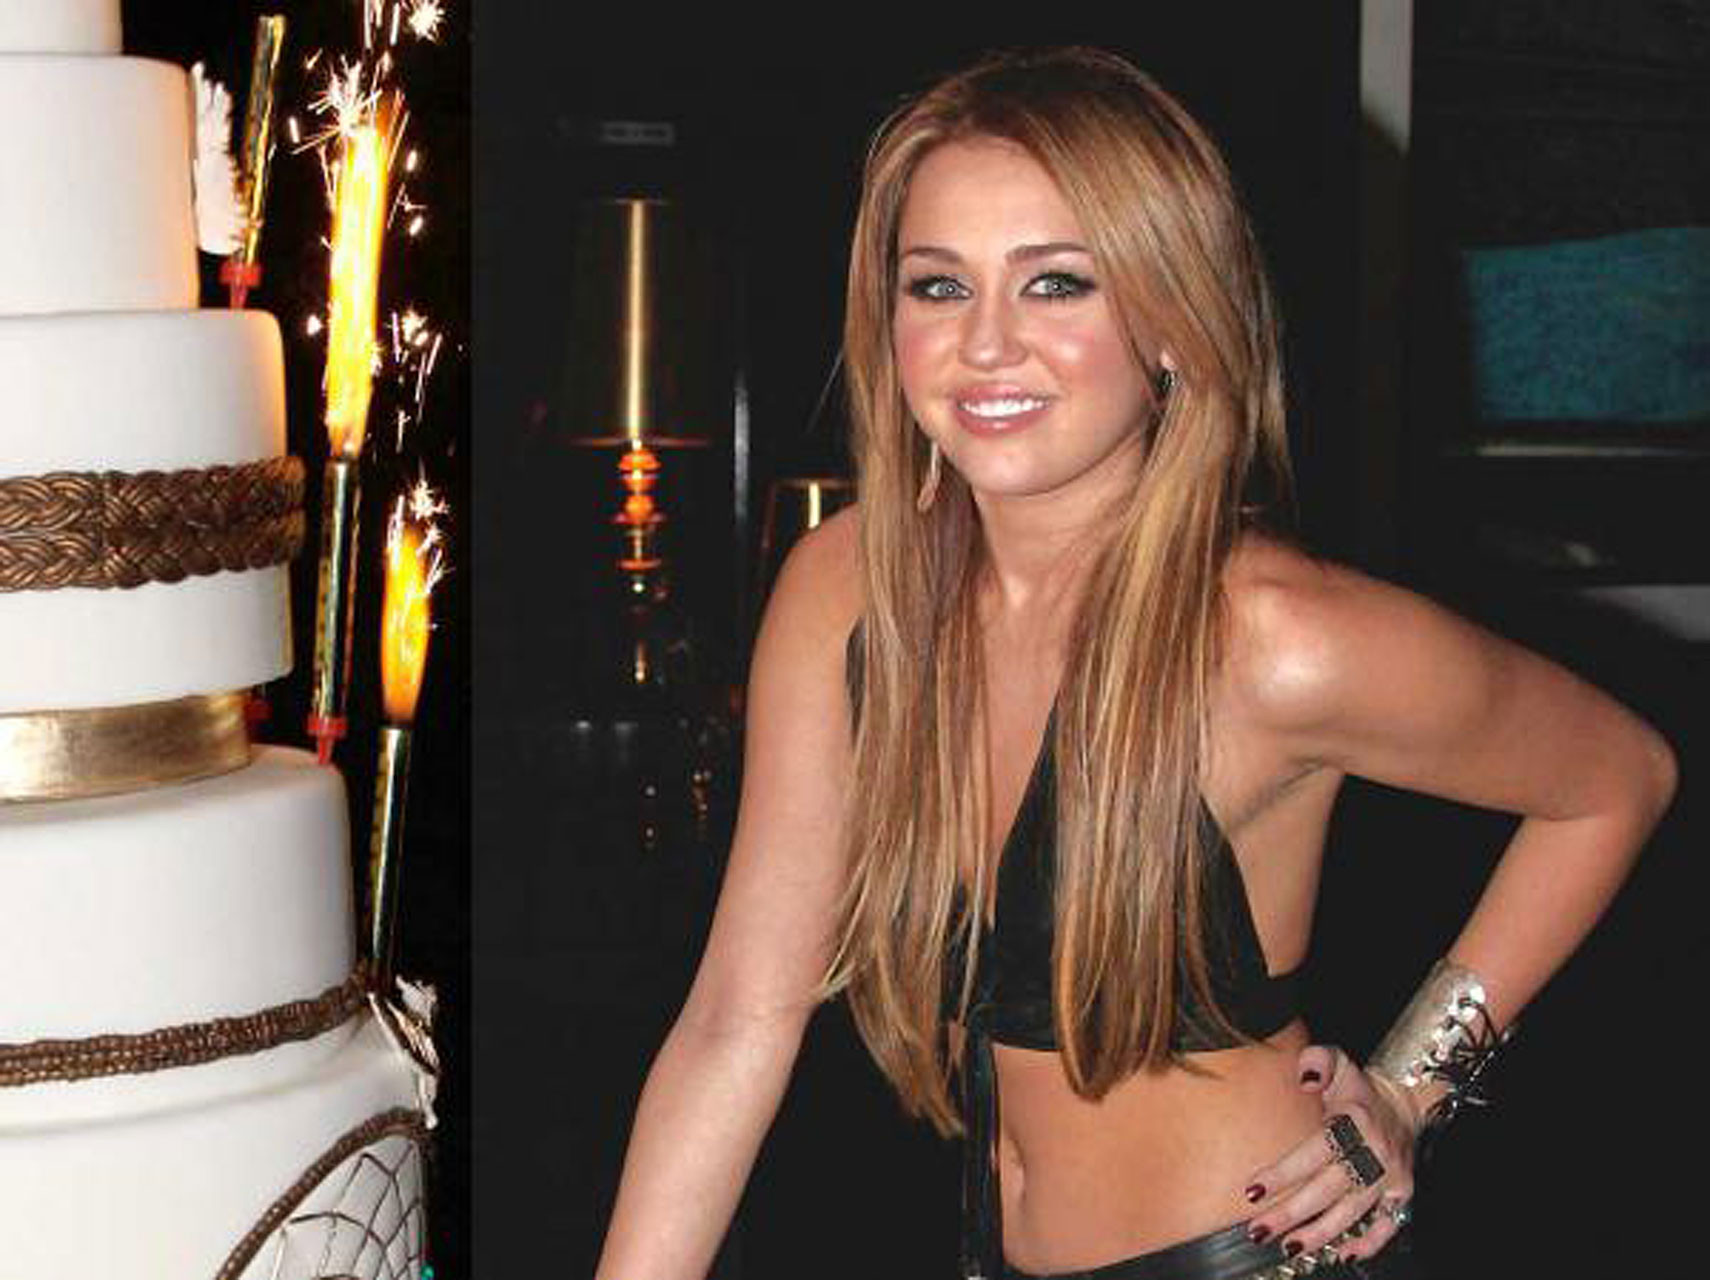 Miley Cyrus young and cute singer celebrated her eighteenth birthday #75325473